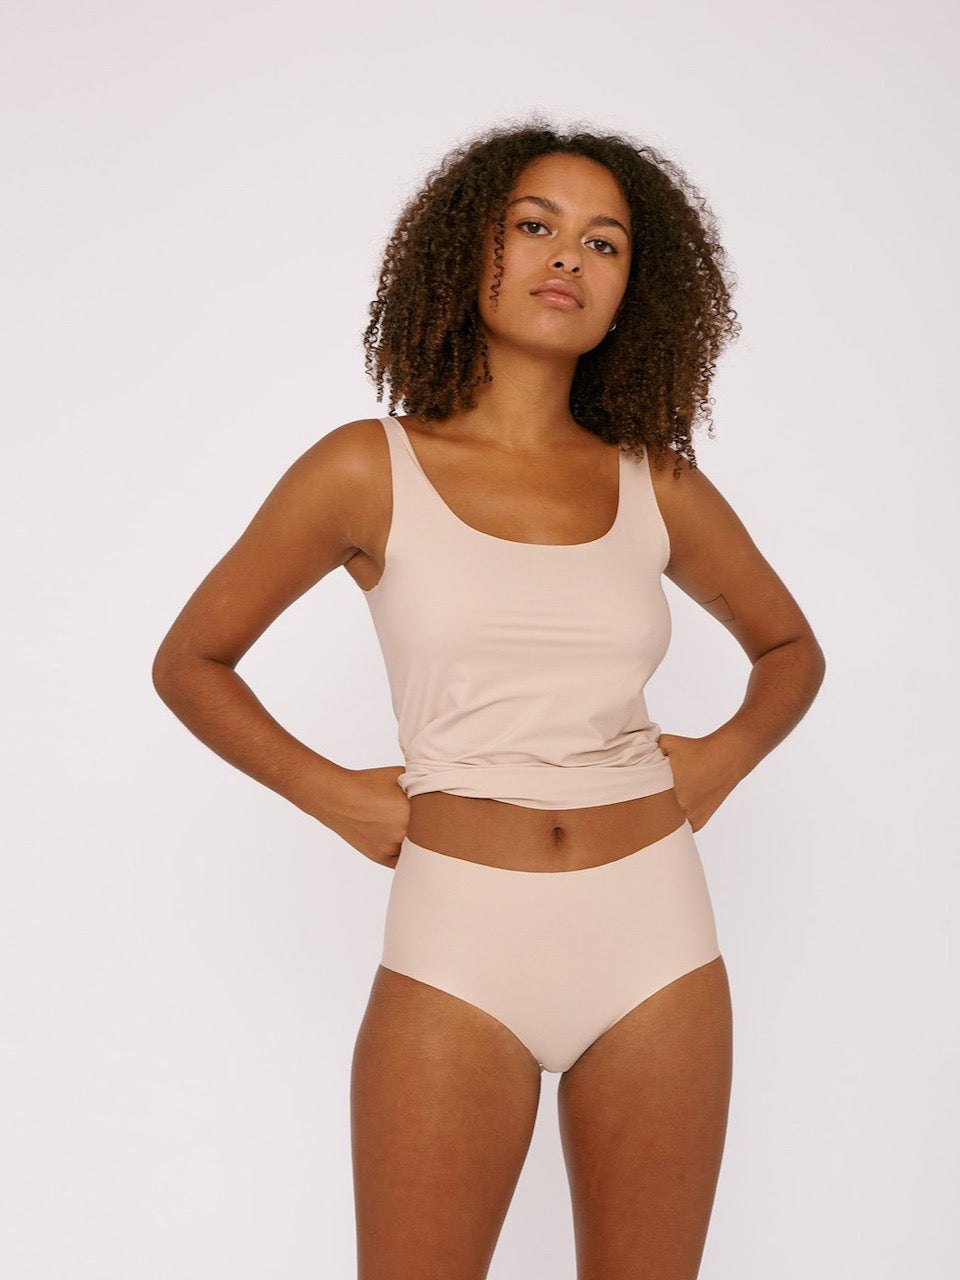 A woman in Organic Basics' Invisible Cheeky High-Rise Briefs (2-pack) - Rose Nude tank top and panties.